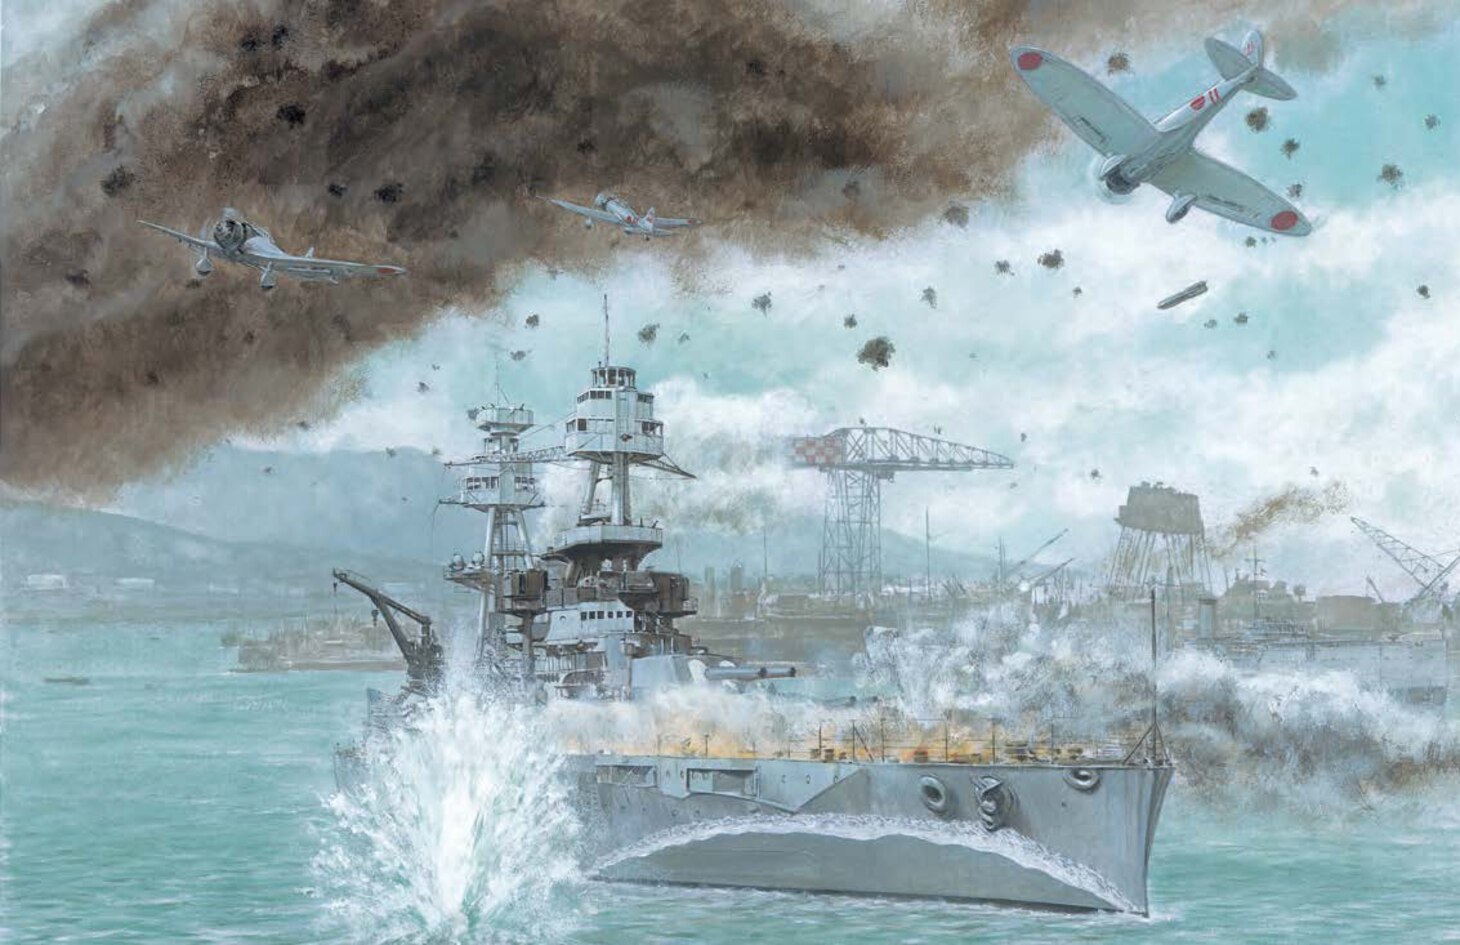 Artist Adam Hook’s panoramic view of the overall attack shows the battleship USS Nevada (BB 36) struggling to make it out of the close confines of the harbor and into the open sea to avoid blocking the main channel by sinking. The courageous action was undertaken by then-Ensign, later-Capt. Joseph K. Taussig Jr., Officer of the Deck, who received the Navy Cross.